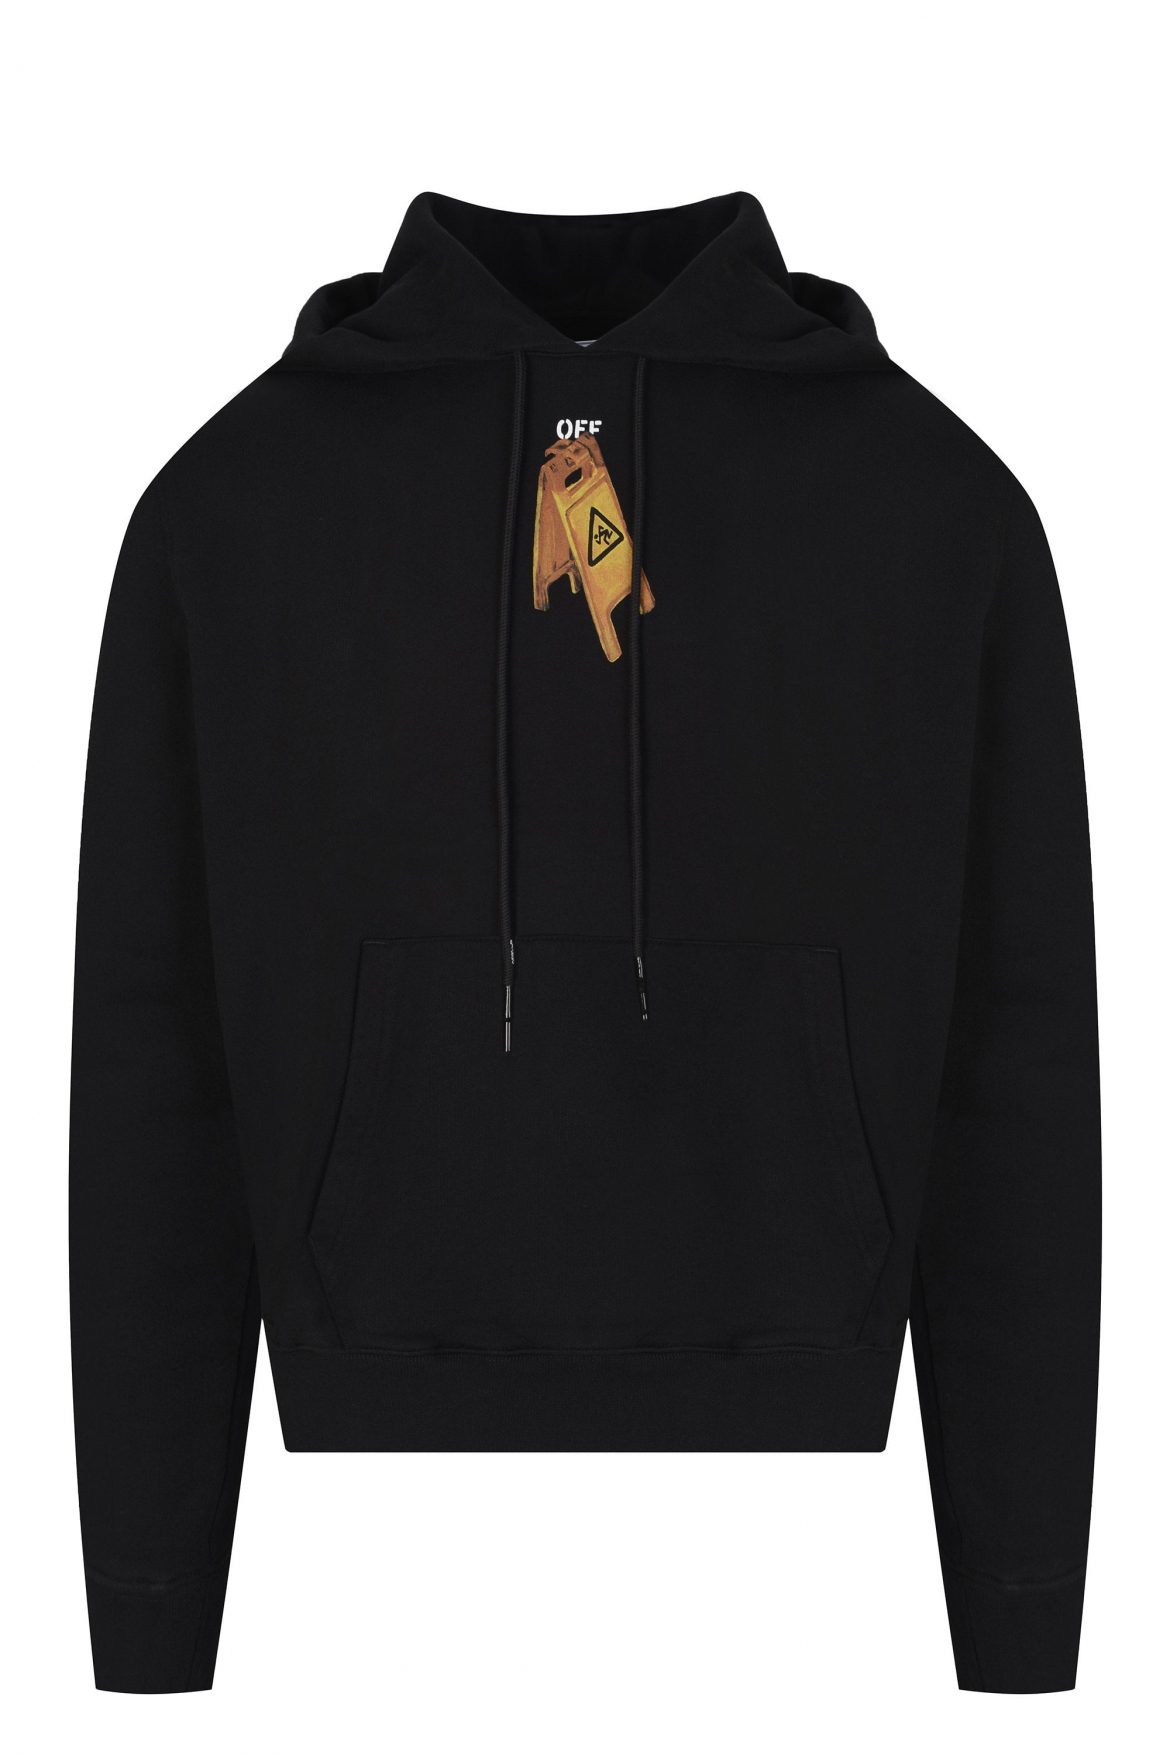 How to wear a hoodie to get modern look?